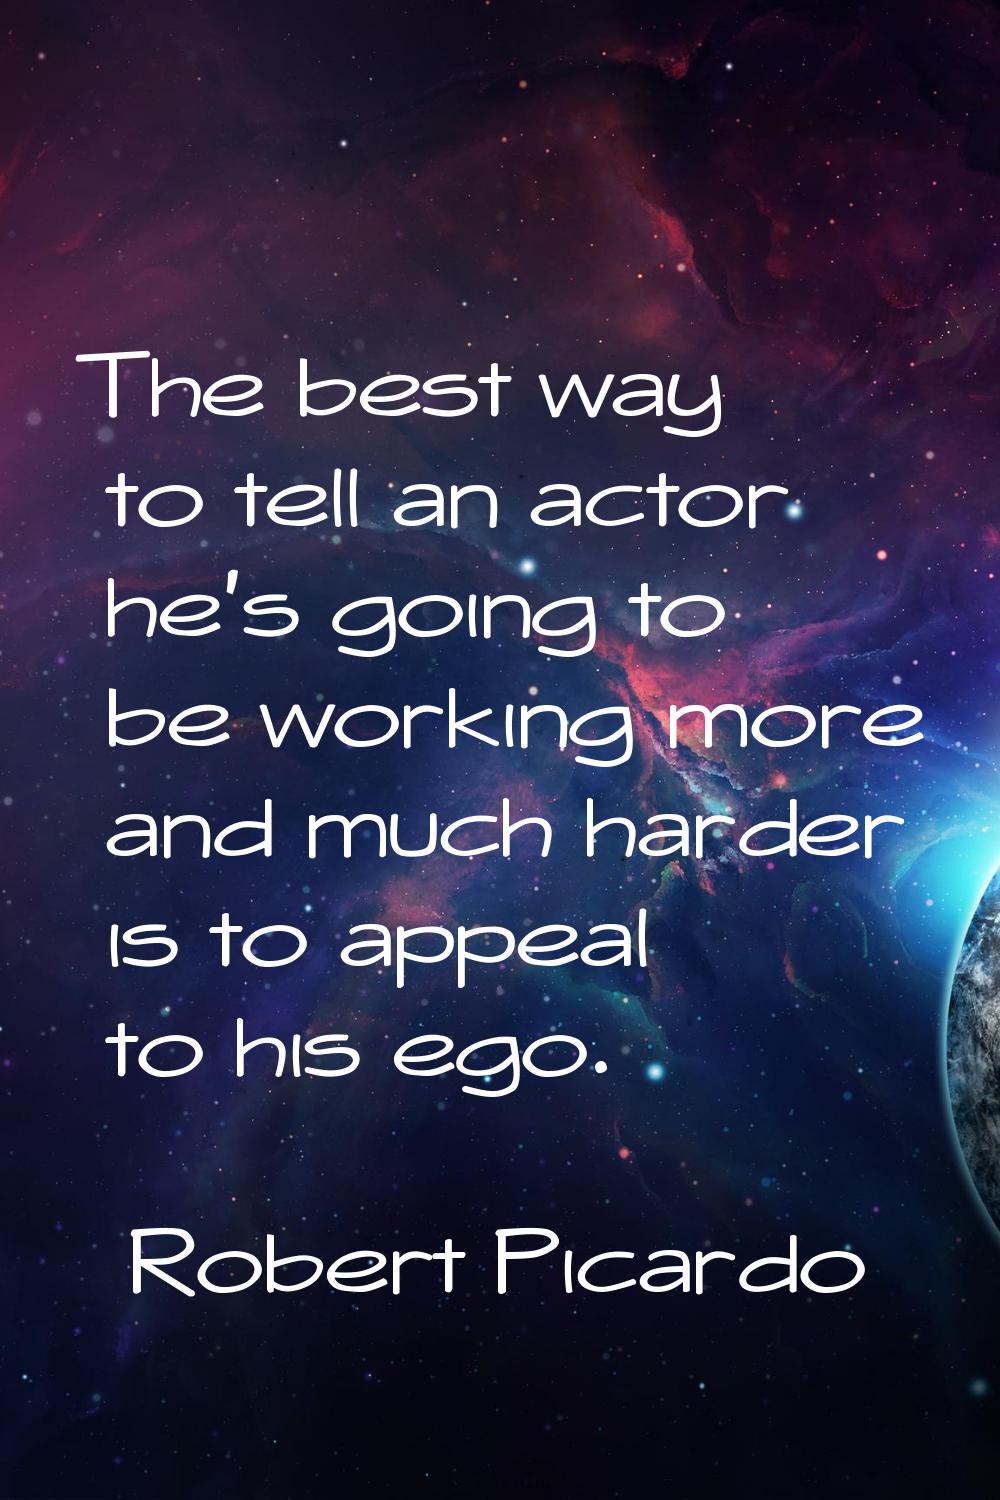 The best way to tell an actor he's going to be working more and much harder is to appeal to his ego